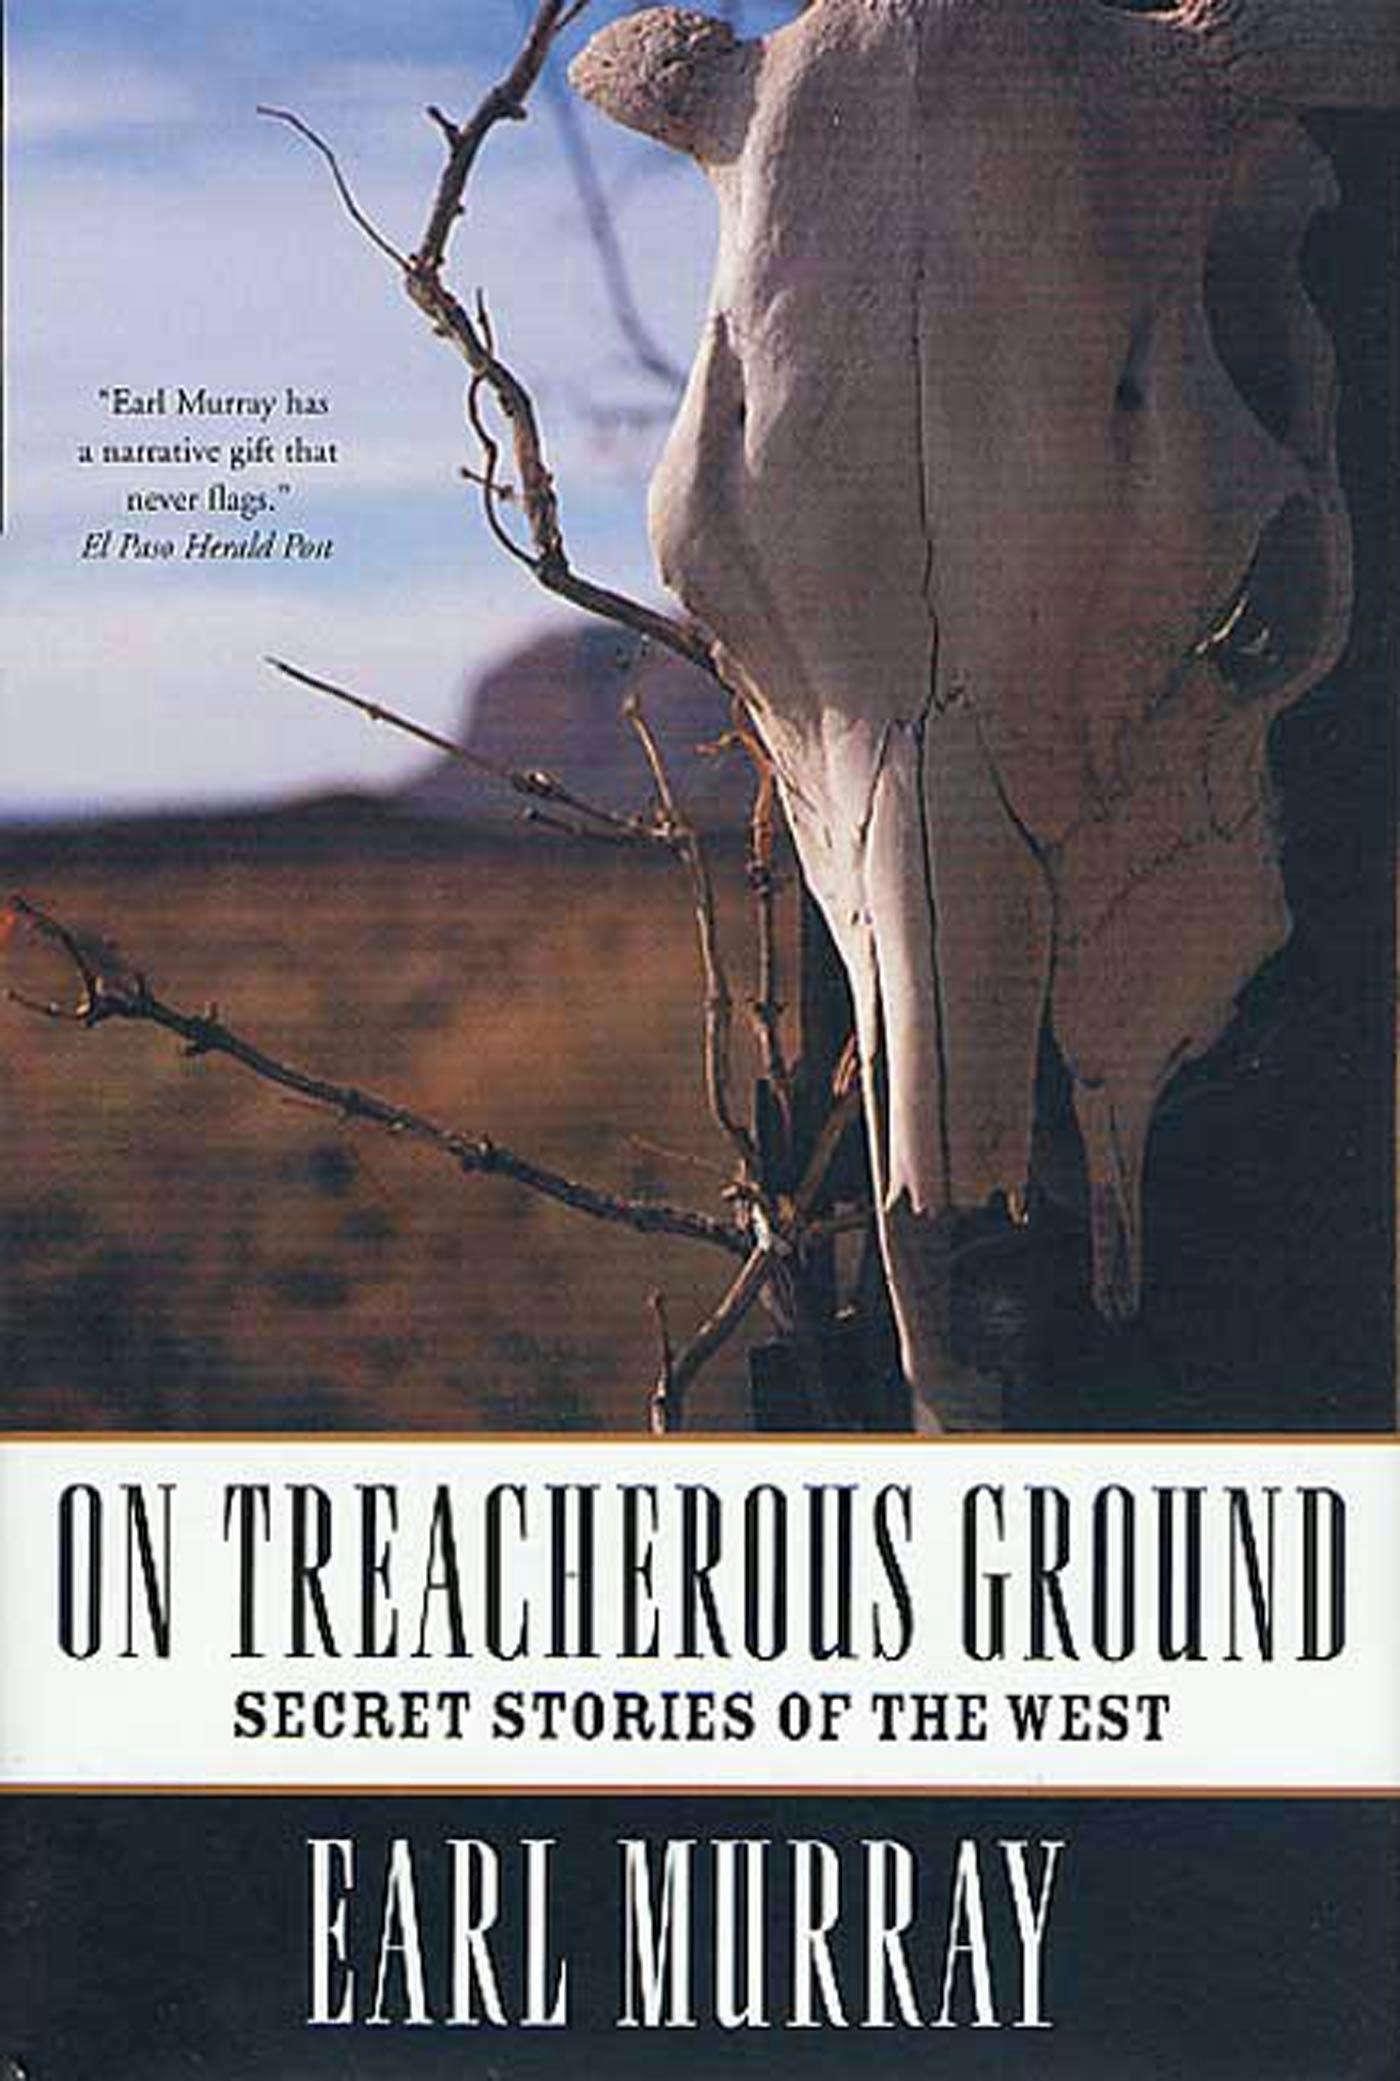 Cover for the book titled as: On Treacherous Ground